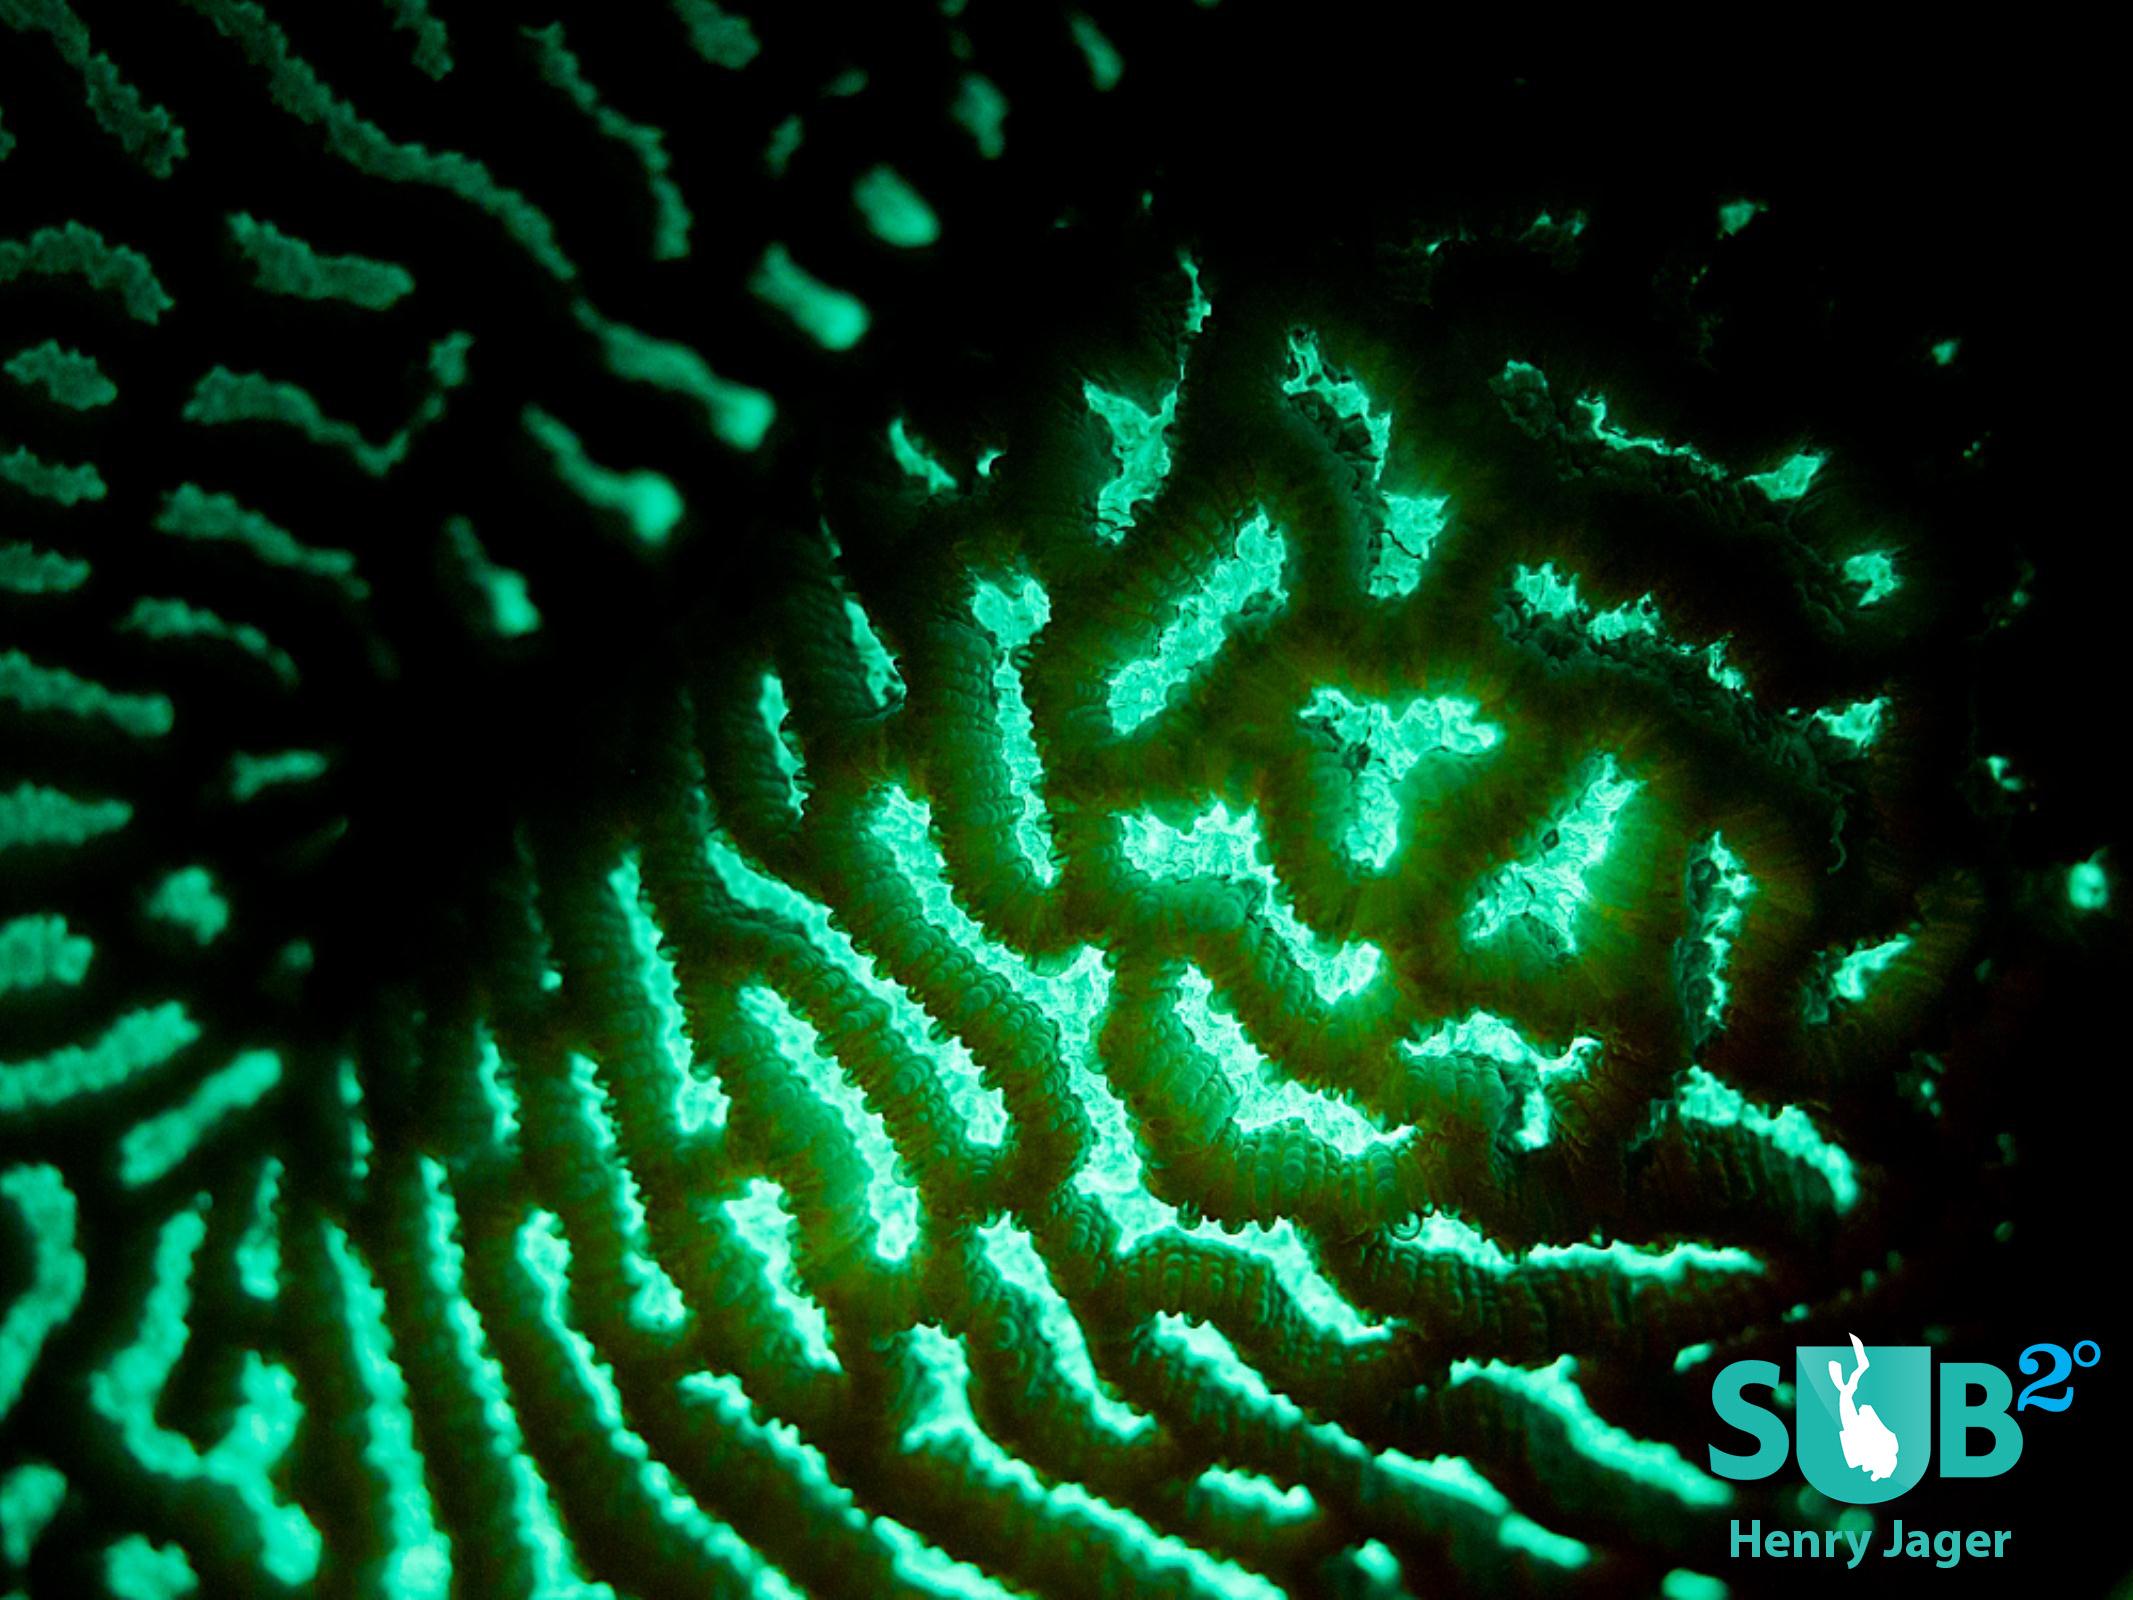 Lettuce coral. Depending on the angle of the light beam hitting the coral, dark areas or really glowing ones appear.